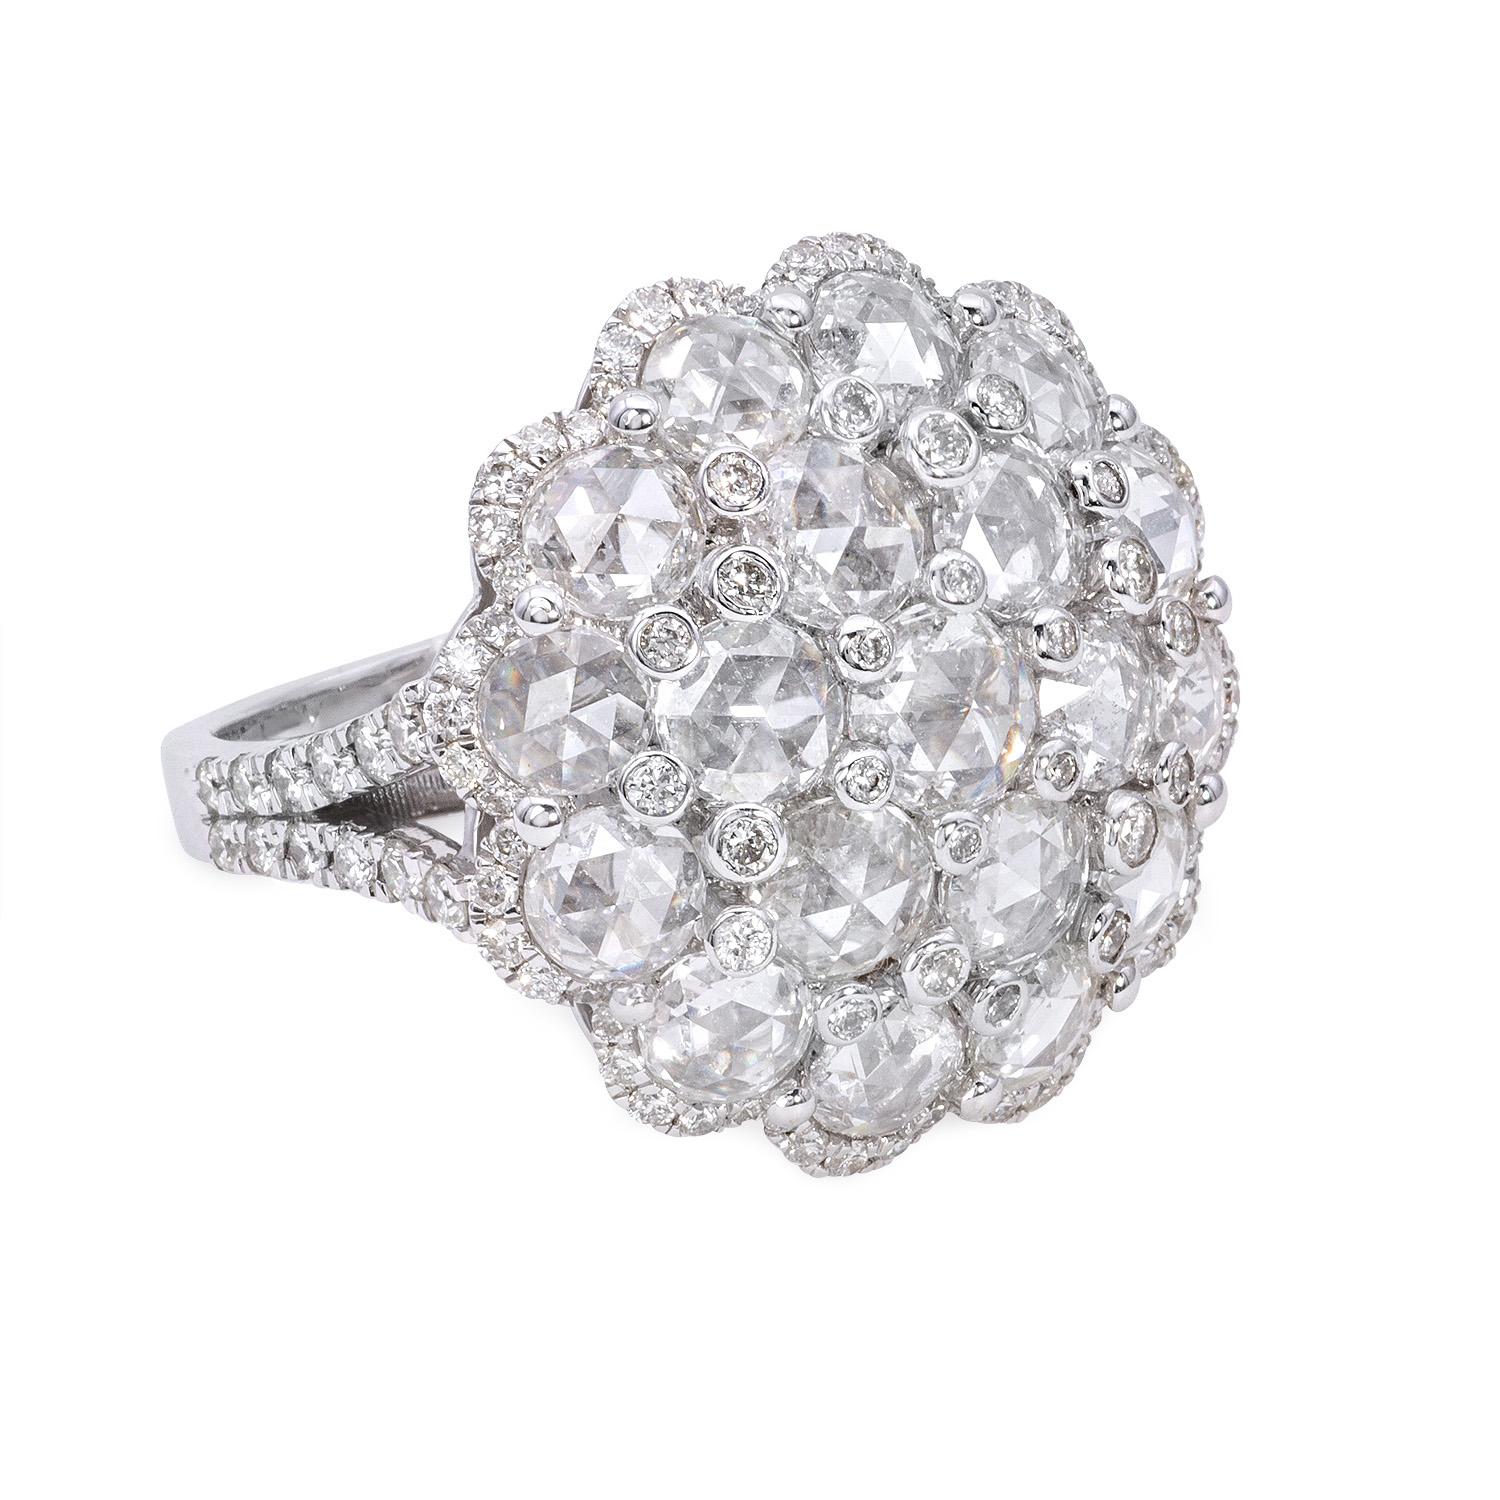 This stunning ring boasts of a remarkable combination of rose-cut diamonds weighing 2.23 carats and round-cut diamonds weighing 0.61 carats, set in 18K white gold. The bigger rose-cut diamonds allow for a more unique and multidimensional sparkle,